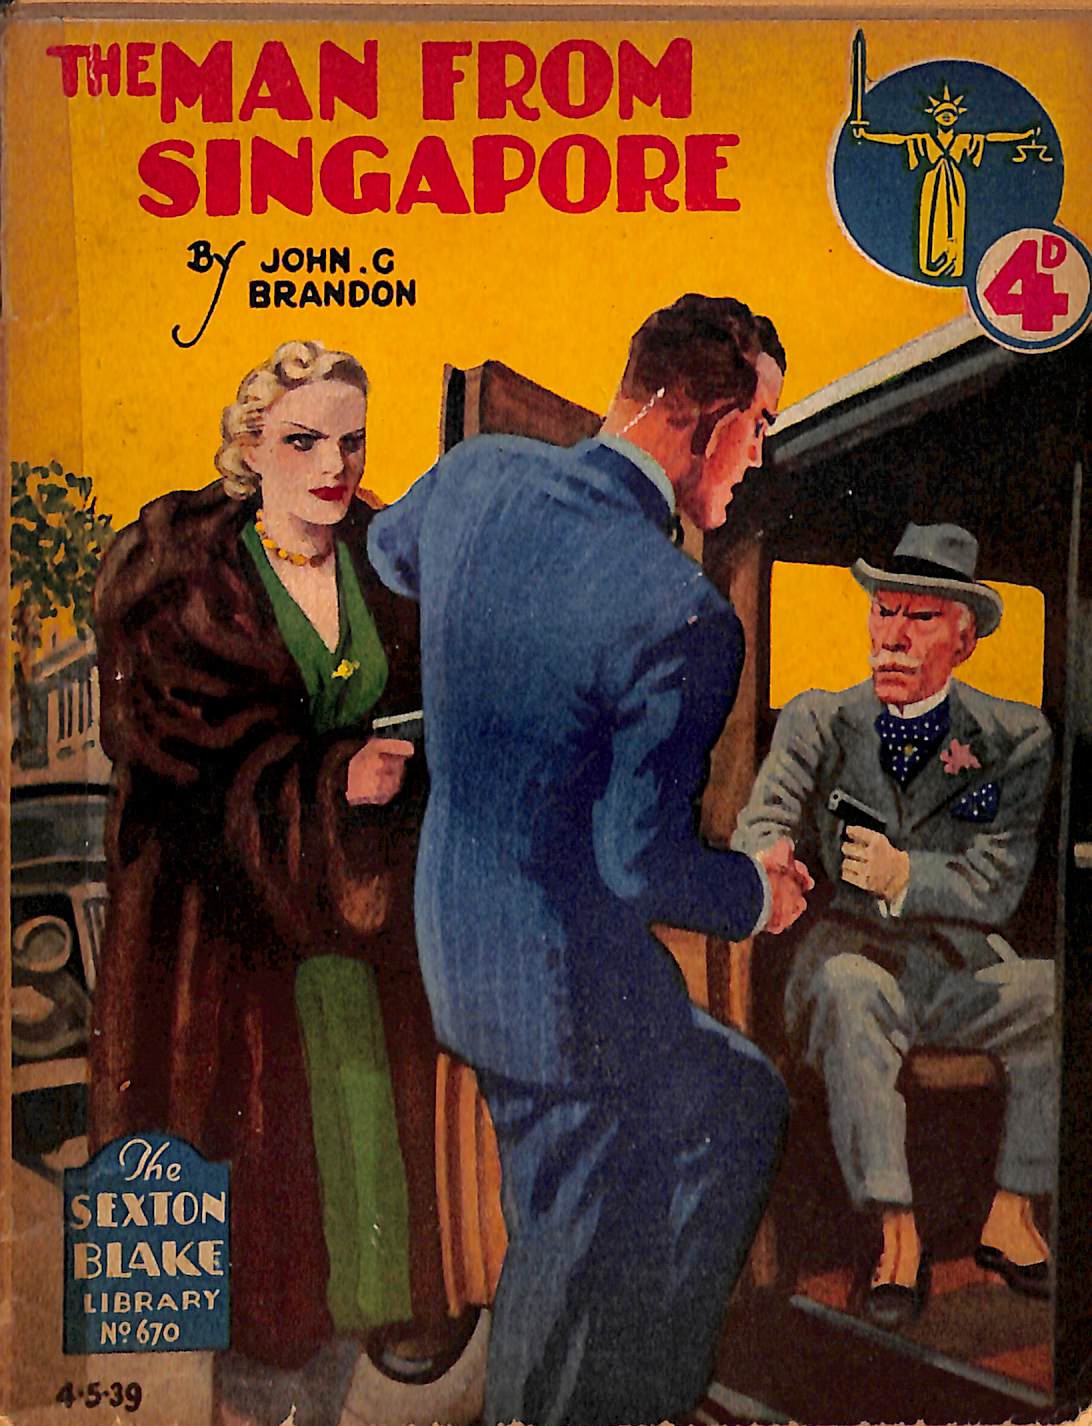 Book Cover For Sexton Blake Library S2 670 - The Man from Singapore